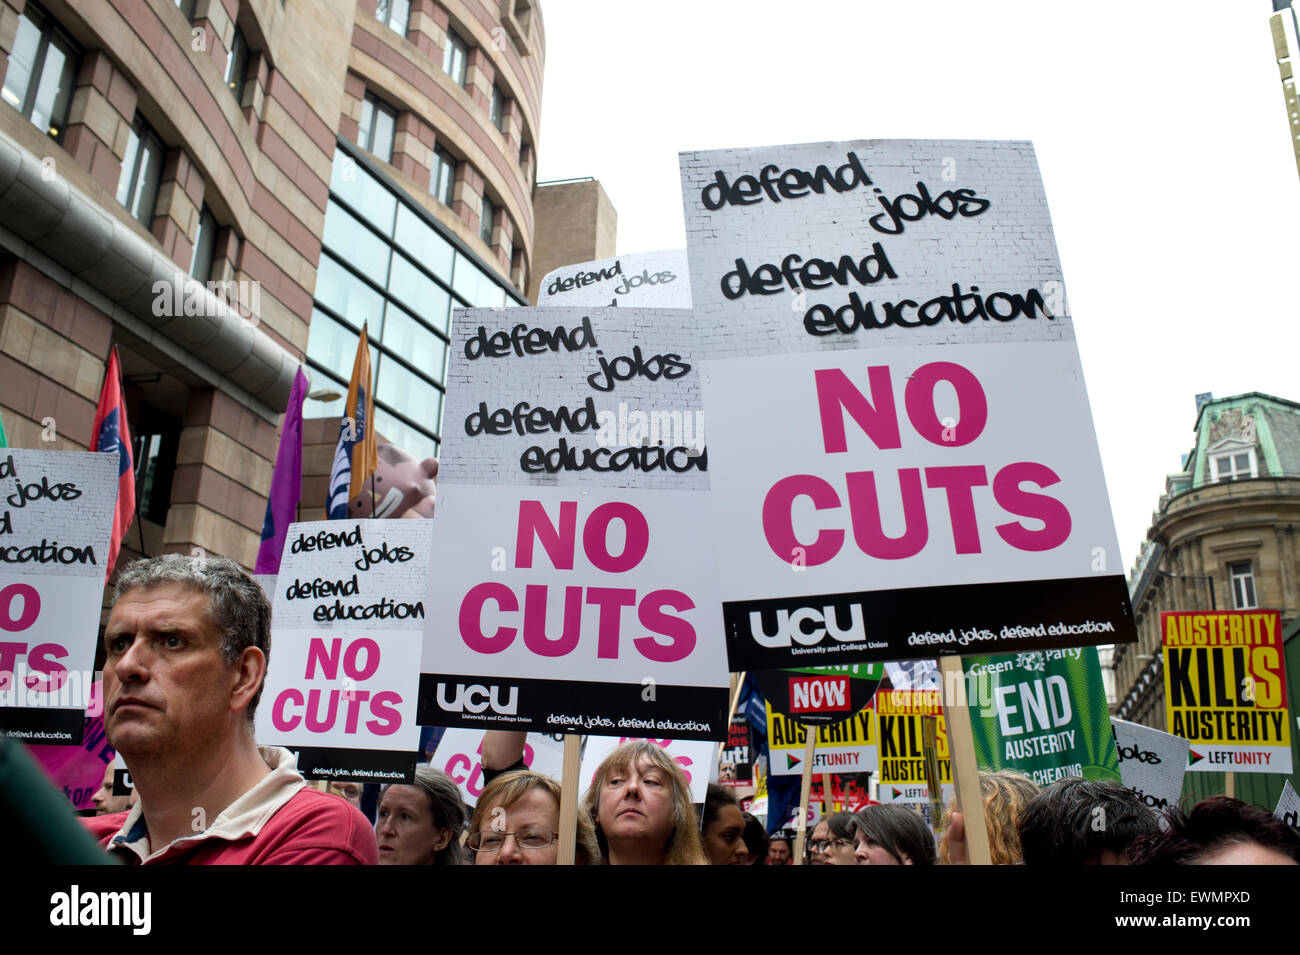 March against austerity, London June 20th 2015. protesters carry placards saying 'Defend jobs, defend education, No Cuts' Stock Photo